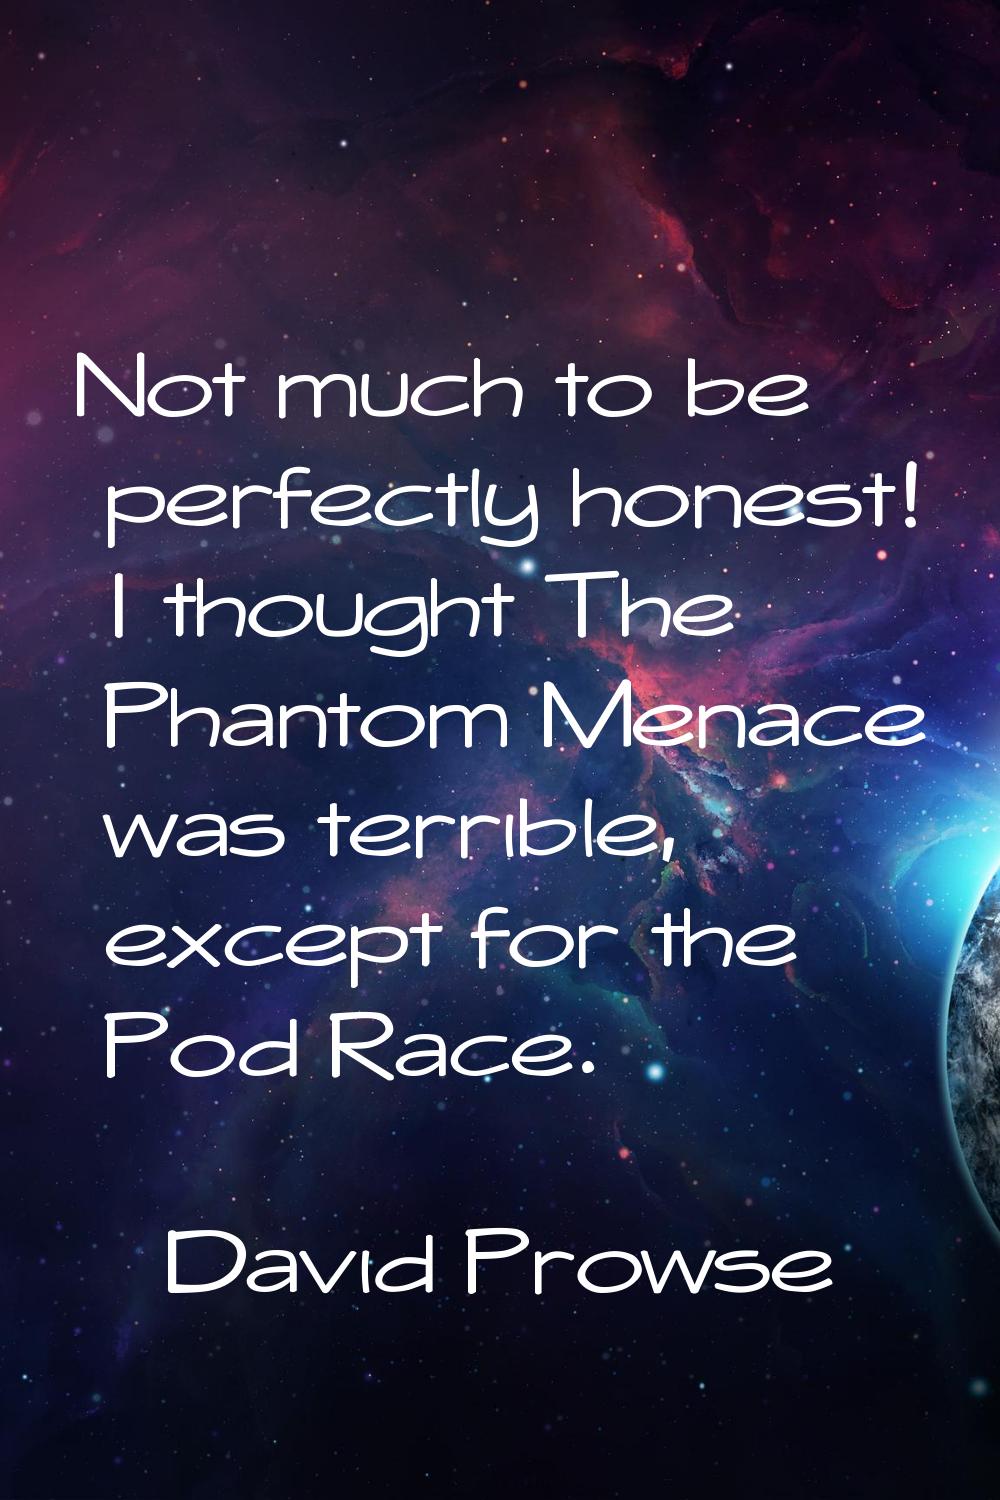 Not much to be perfectly honest! I thought The Phantom Menace was terrible, except for the Pod Race